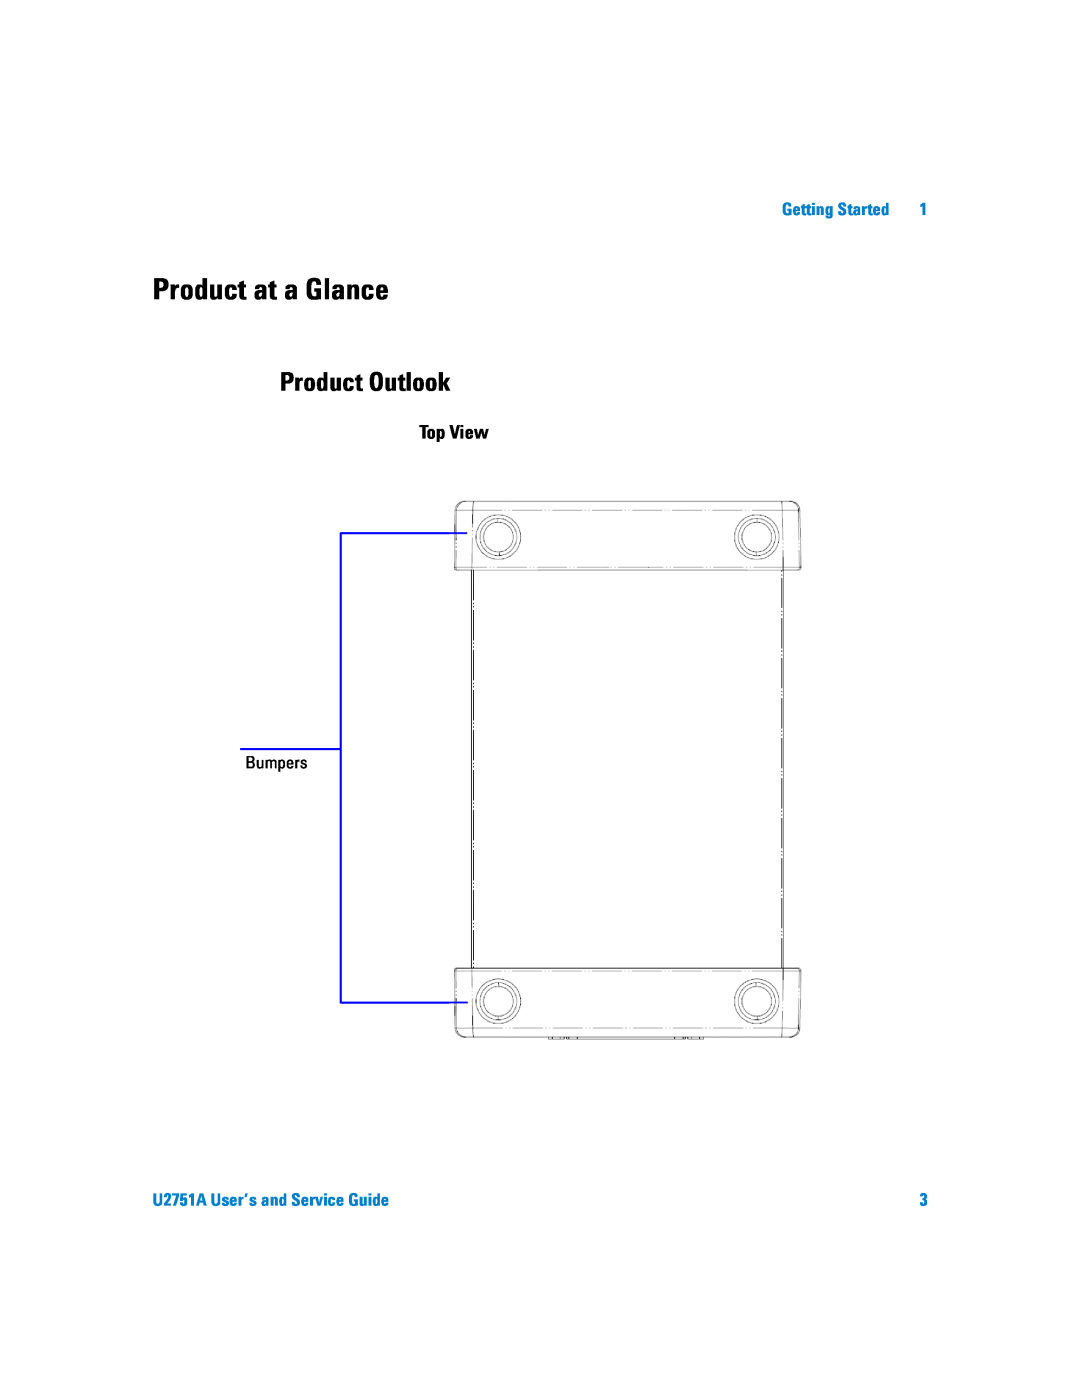 Agilent Technologies manual Product at a Glance, Product Outlook, Top View, Bumpers, U2751A User’s and Service Guide 